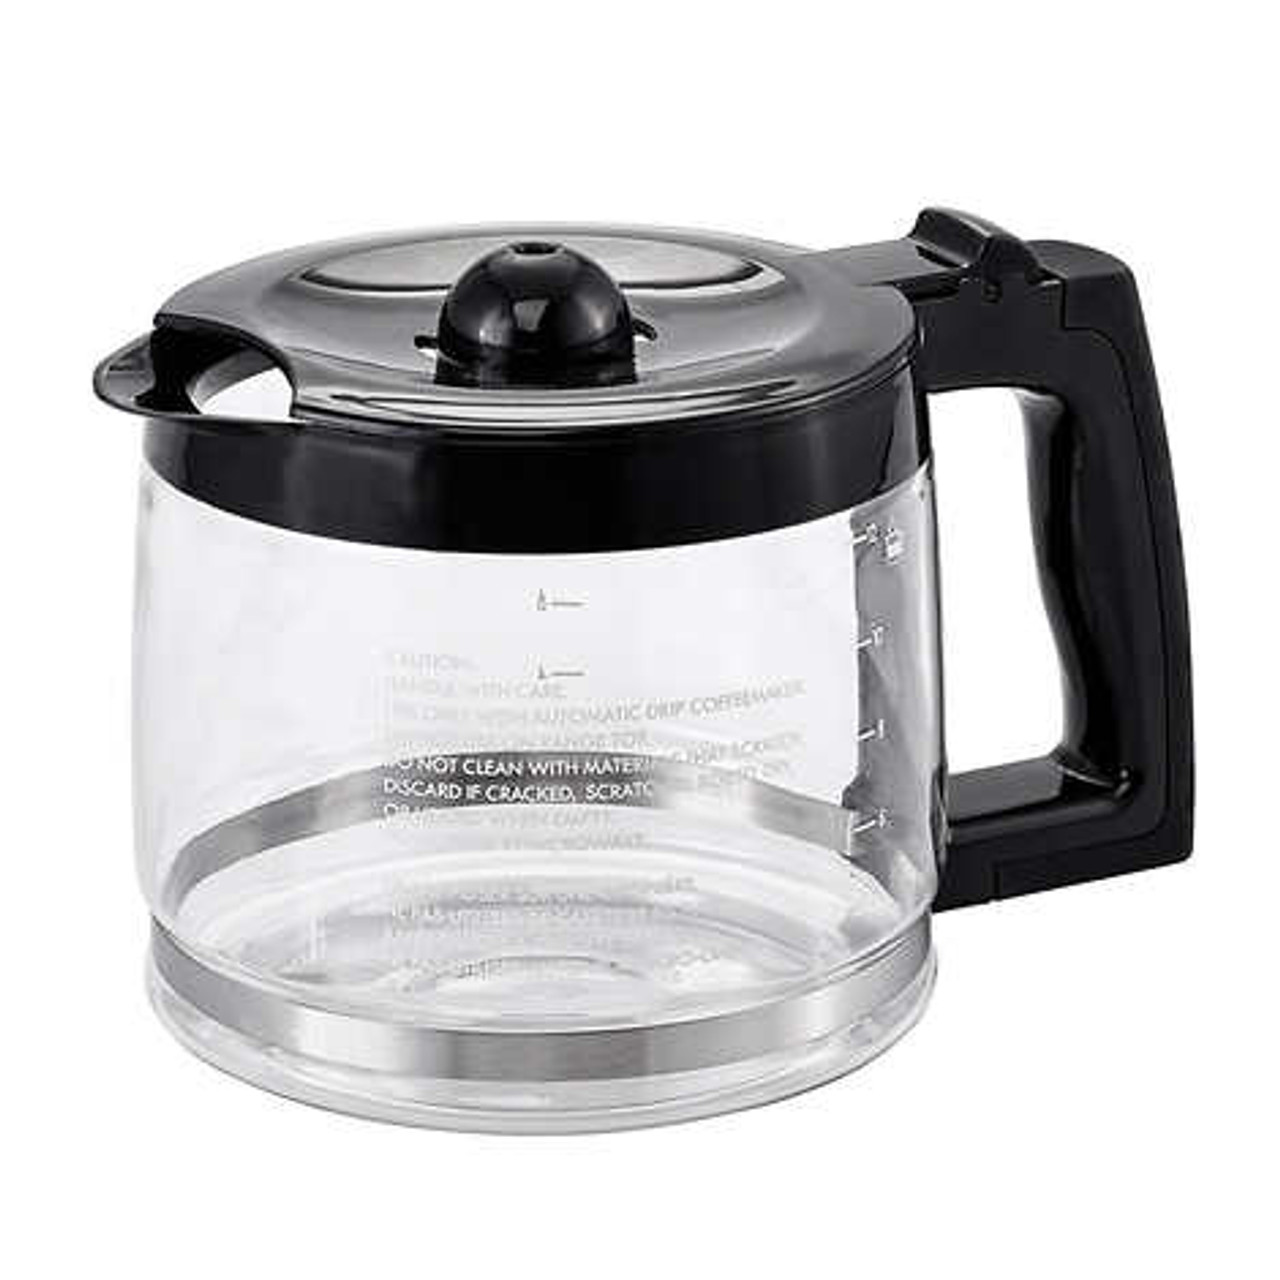 Henckels Statement Stainless Steel 12-Cup Programmable Coffee Maker - Brew Perfection at Your Fingertips- Chicken Pieces